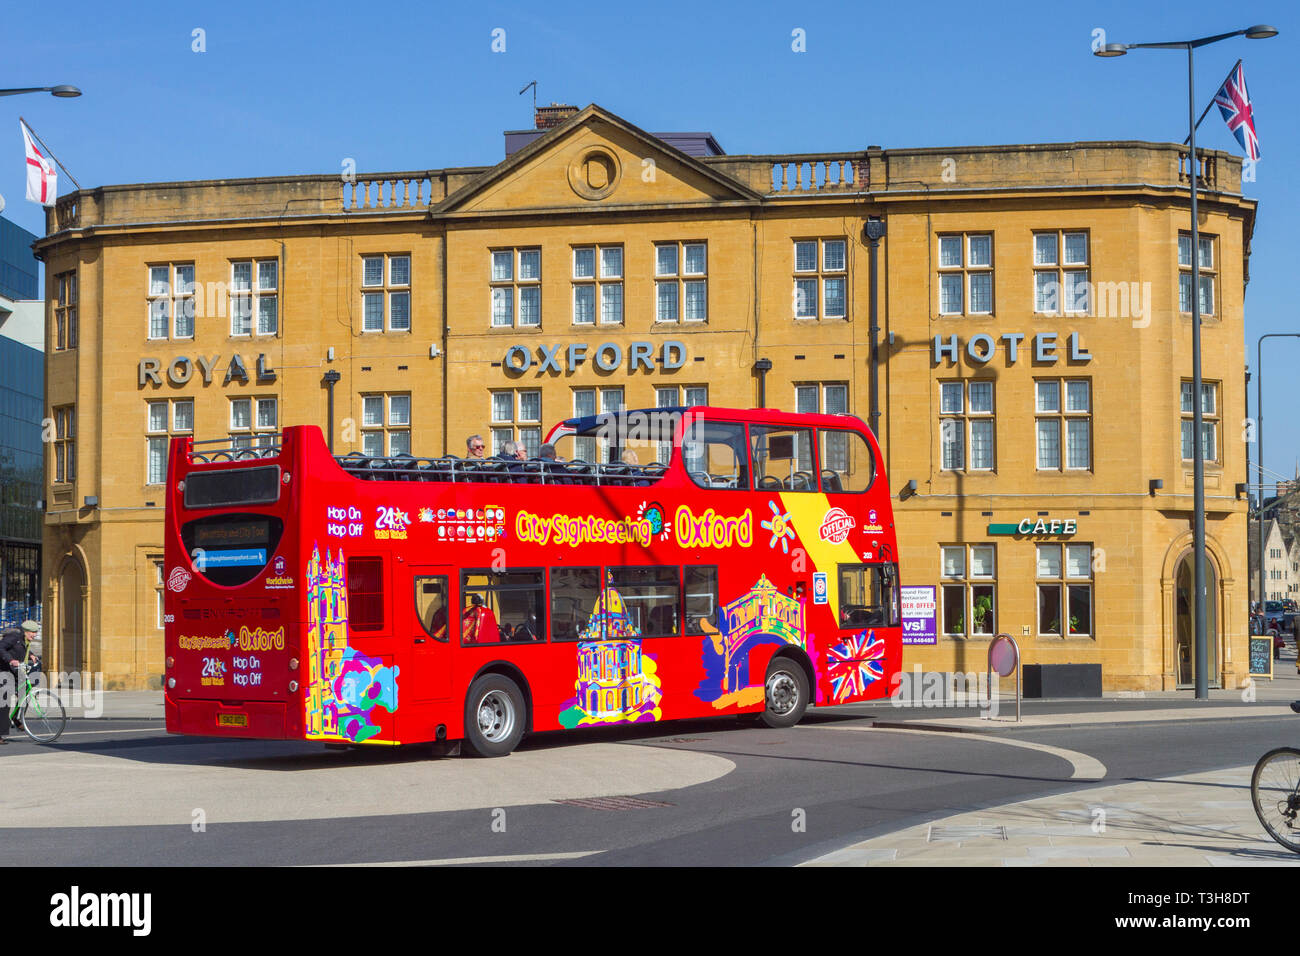 The City Sightseeing Oxford open-topped tour bus passes the The Royal Oxford Hotel Stock Photo